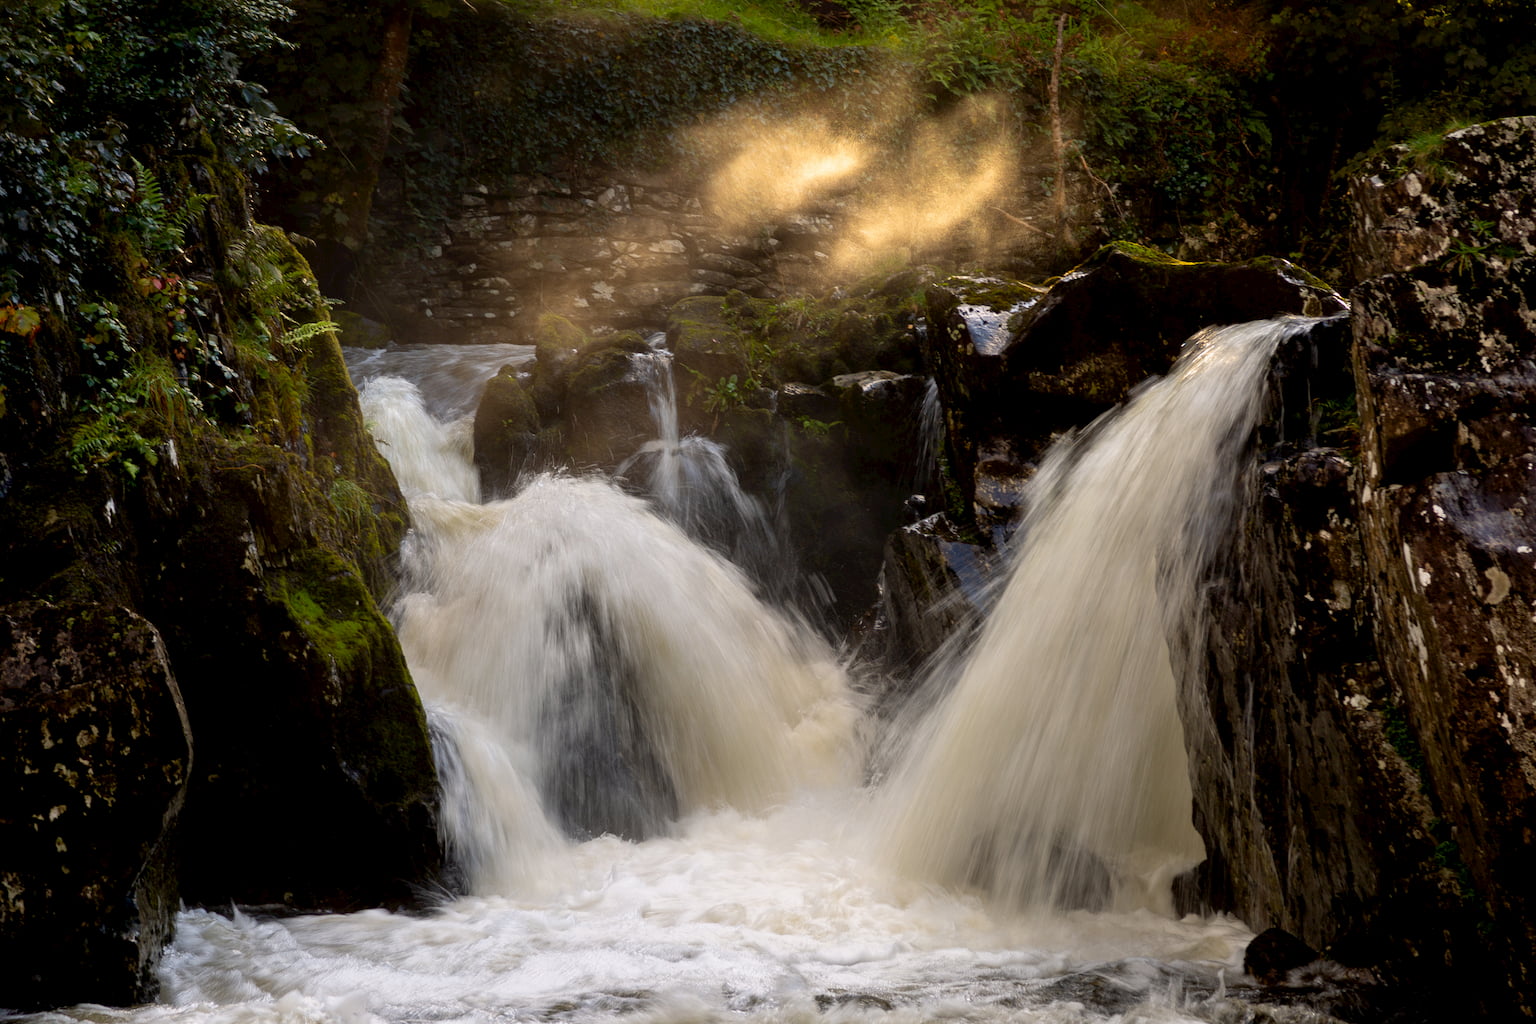 Initmate photograph of waterfall on the River Conwy at Betws-y-Coed with sunlight streaming through.